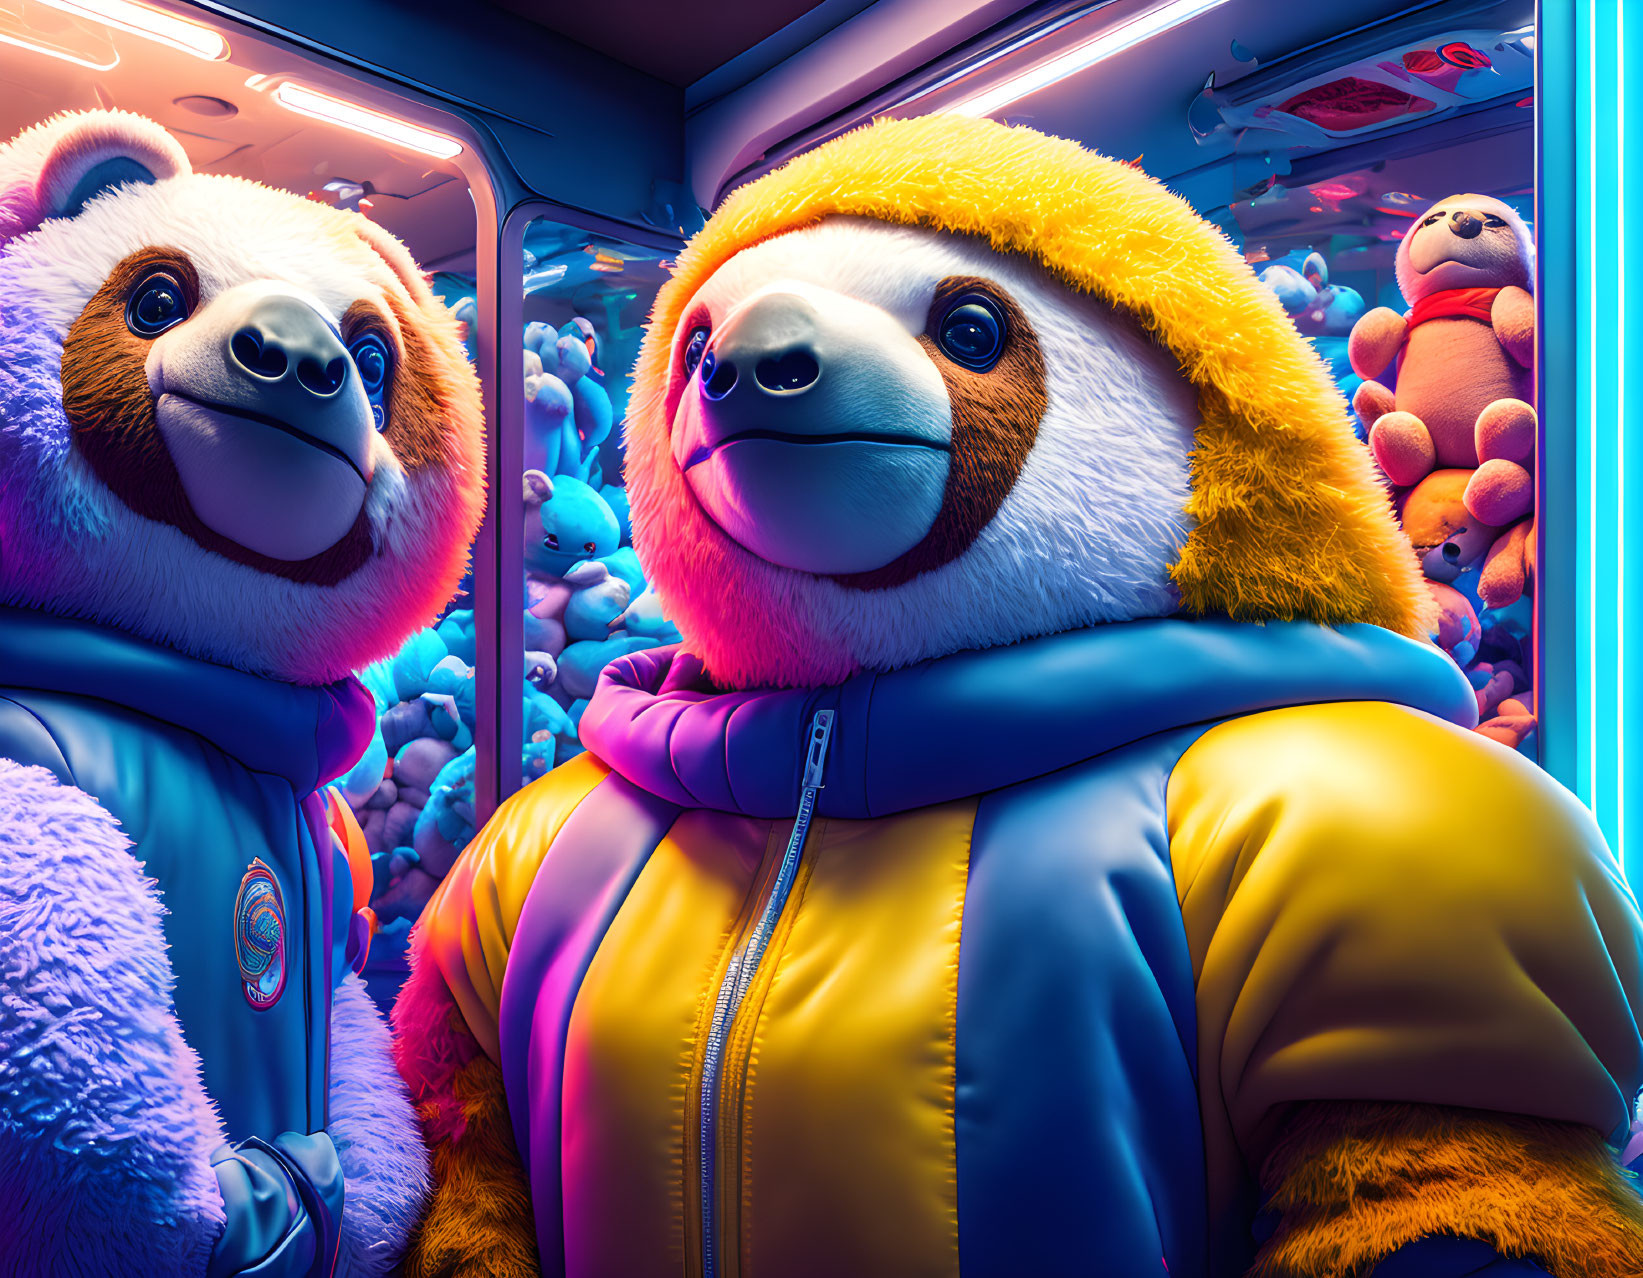 Colorful anthropomorphic sloth characters in vibrant jackets by neon-lit claw machine.